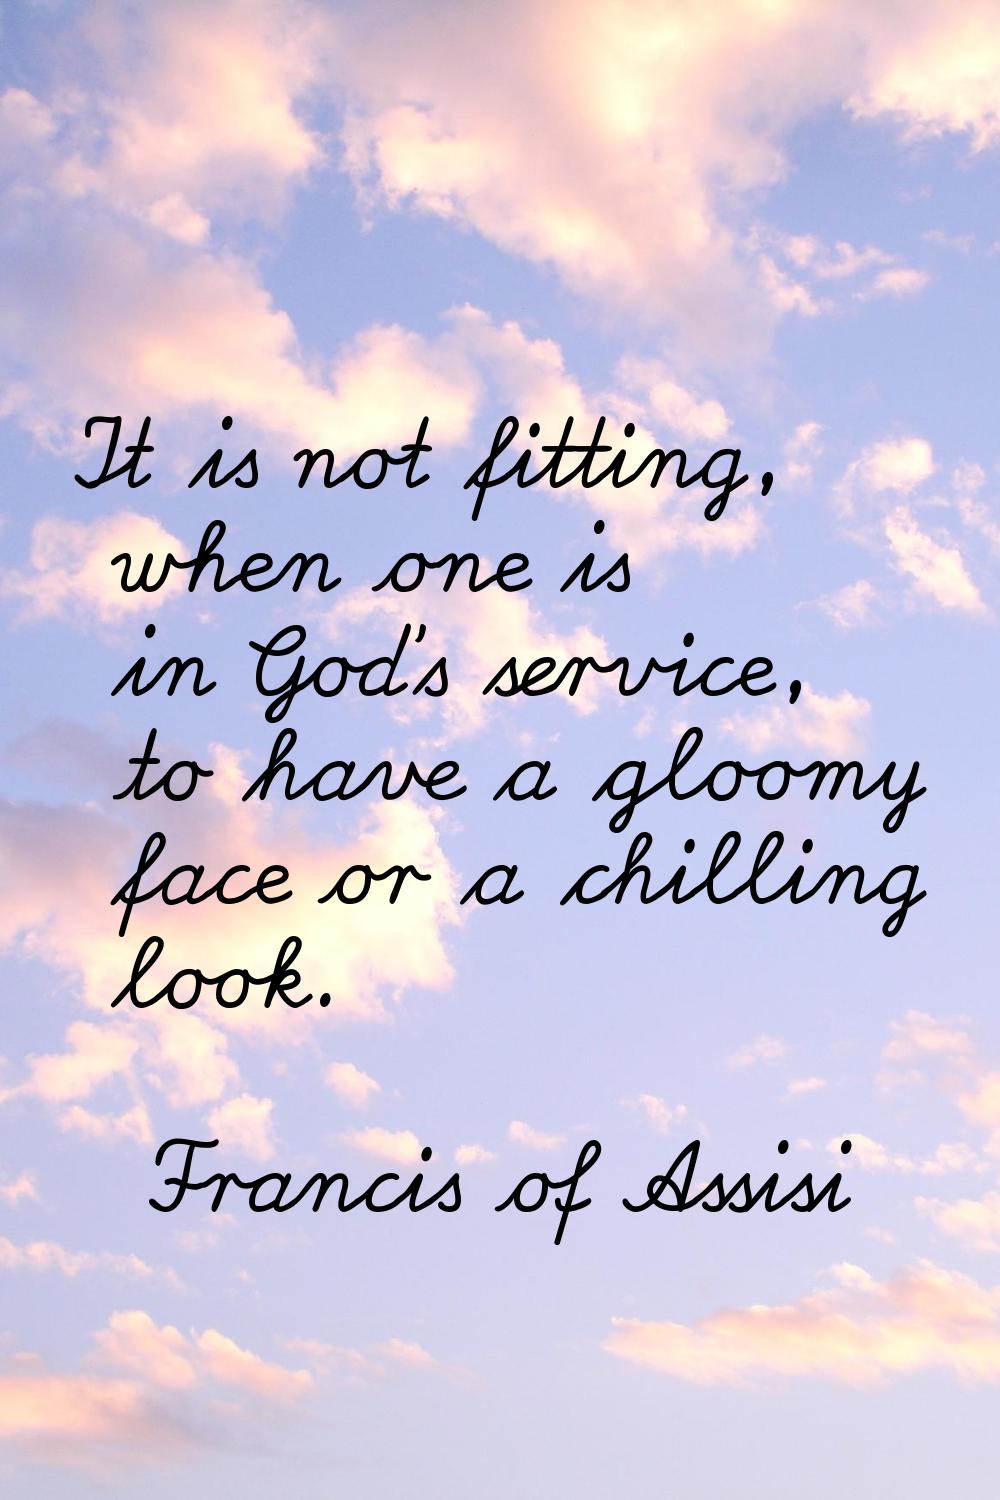 It is not fitting, when one is in God's service, to have a gloomy face or a chilling look.